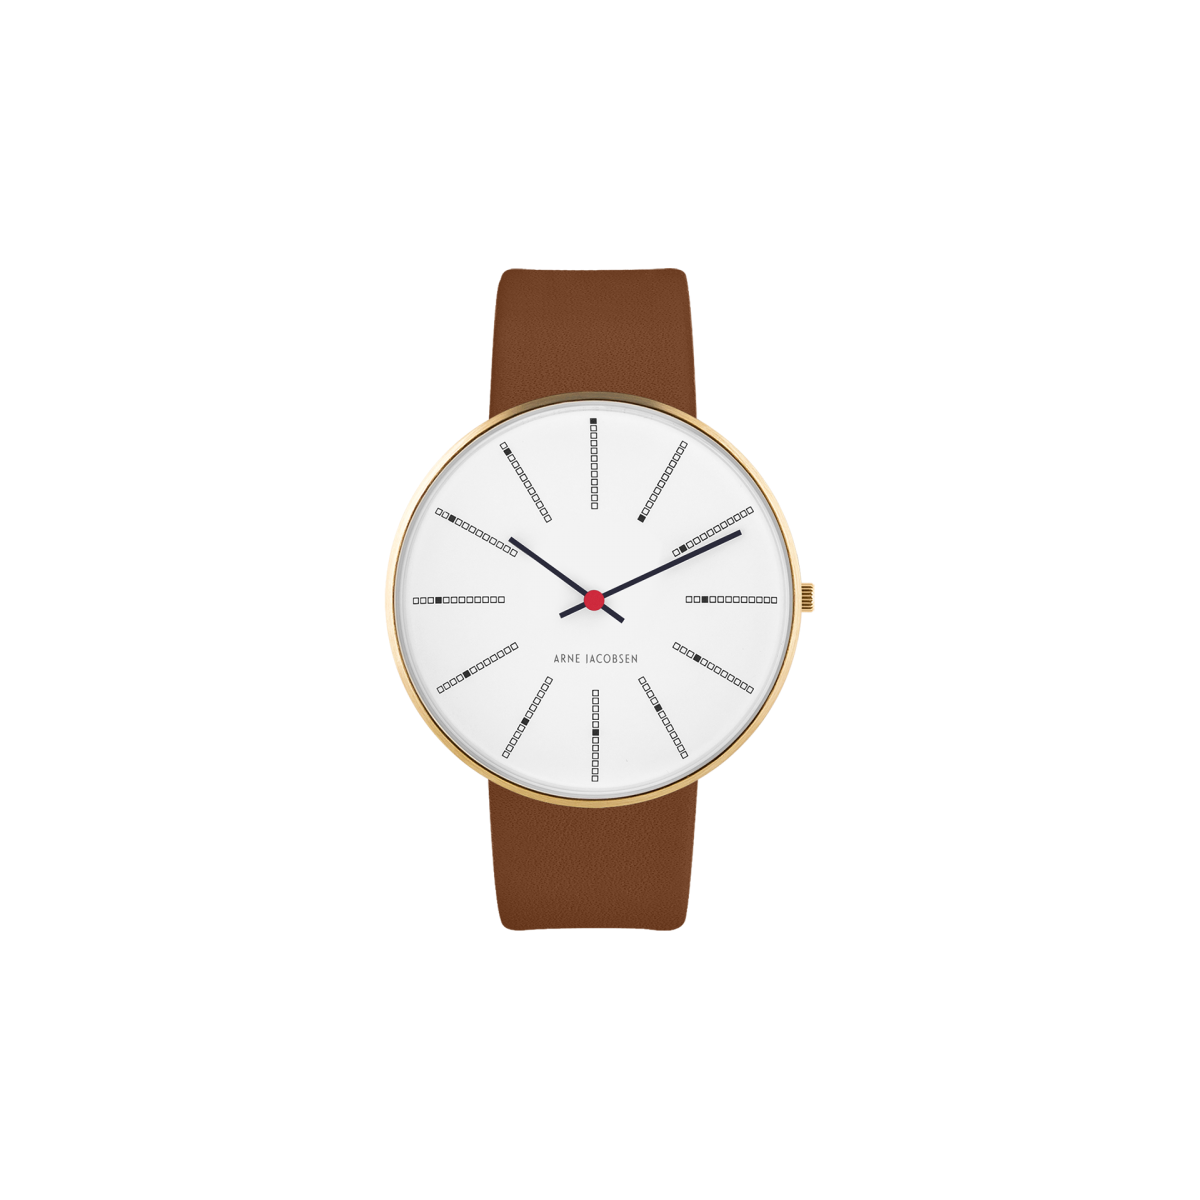 Bankers watch - Ø34 or Ø40 mm - Brushed gold/white, brown leather